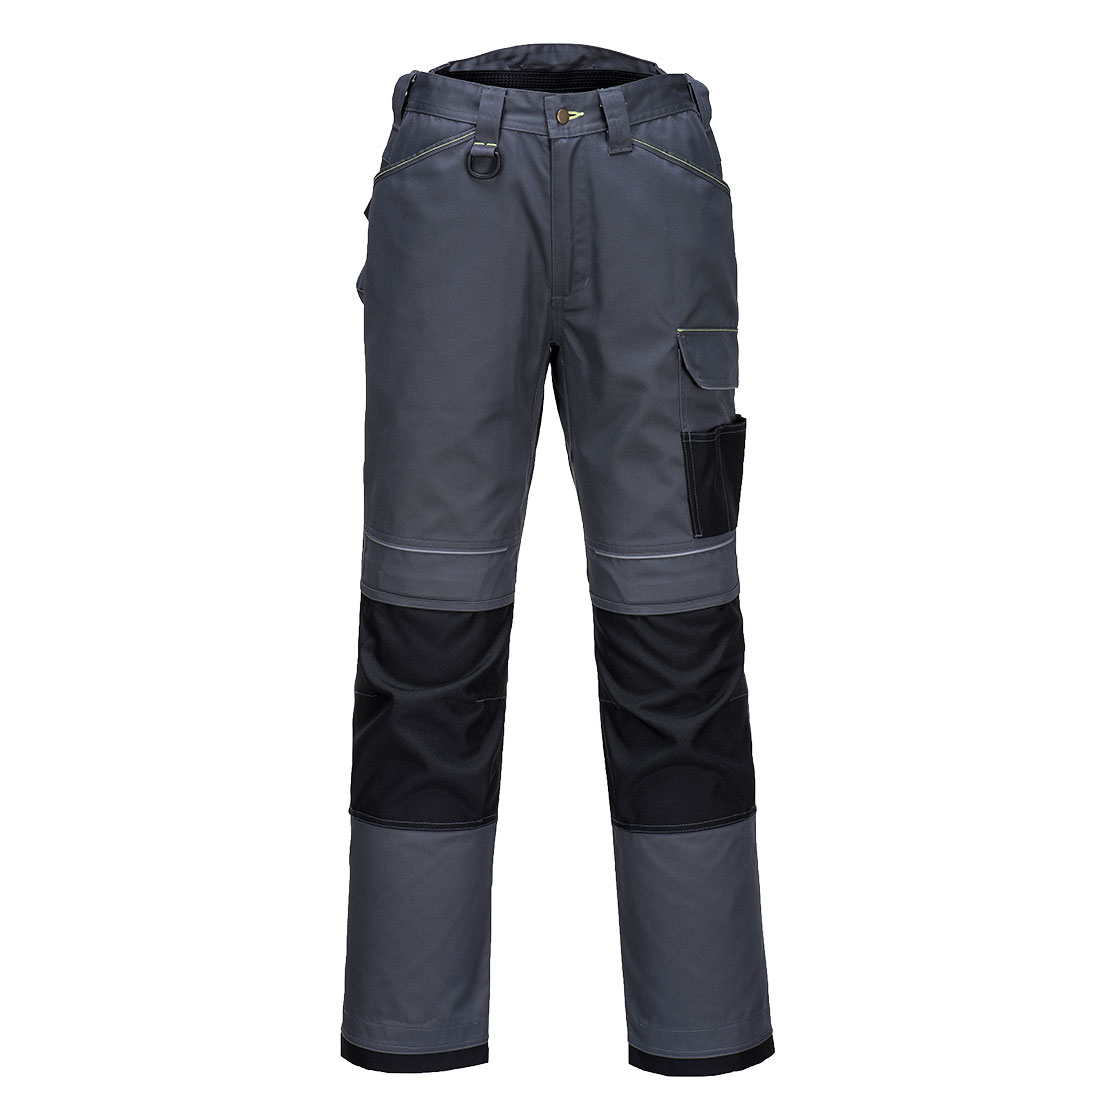 PW3 Work Trousers, ZoomBk     UK38 EU54  F R/Fit